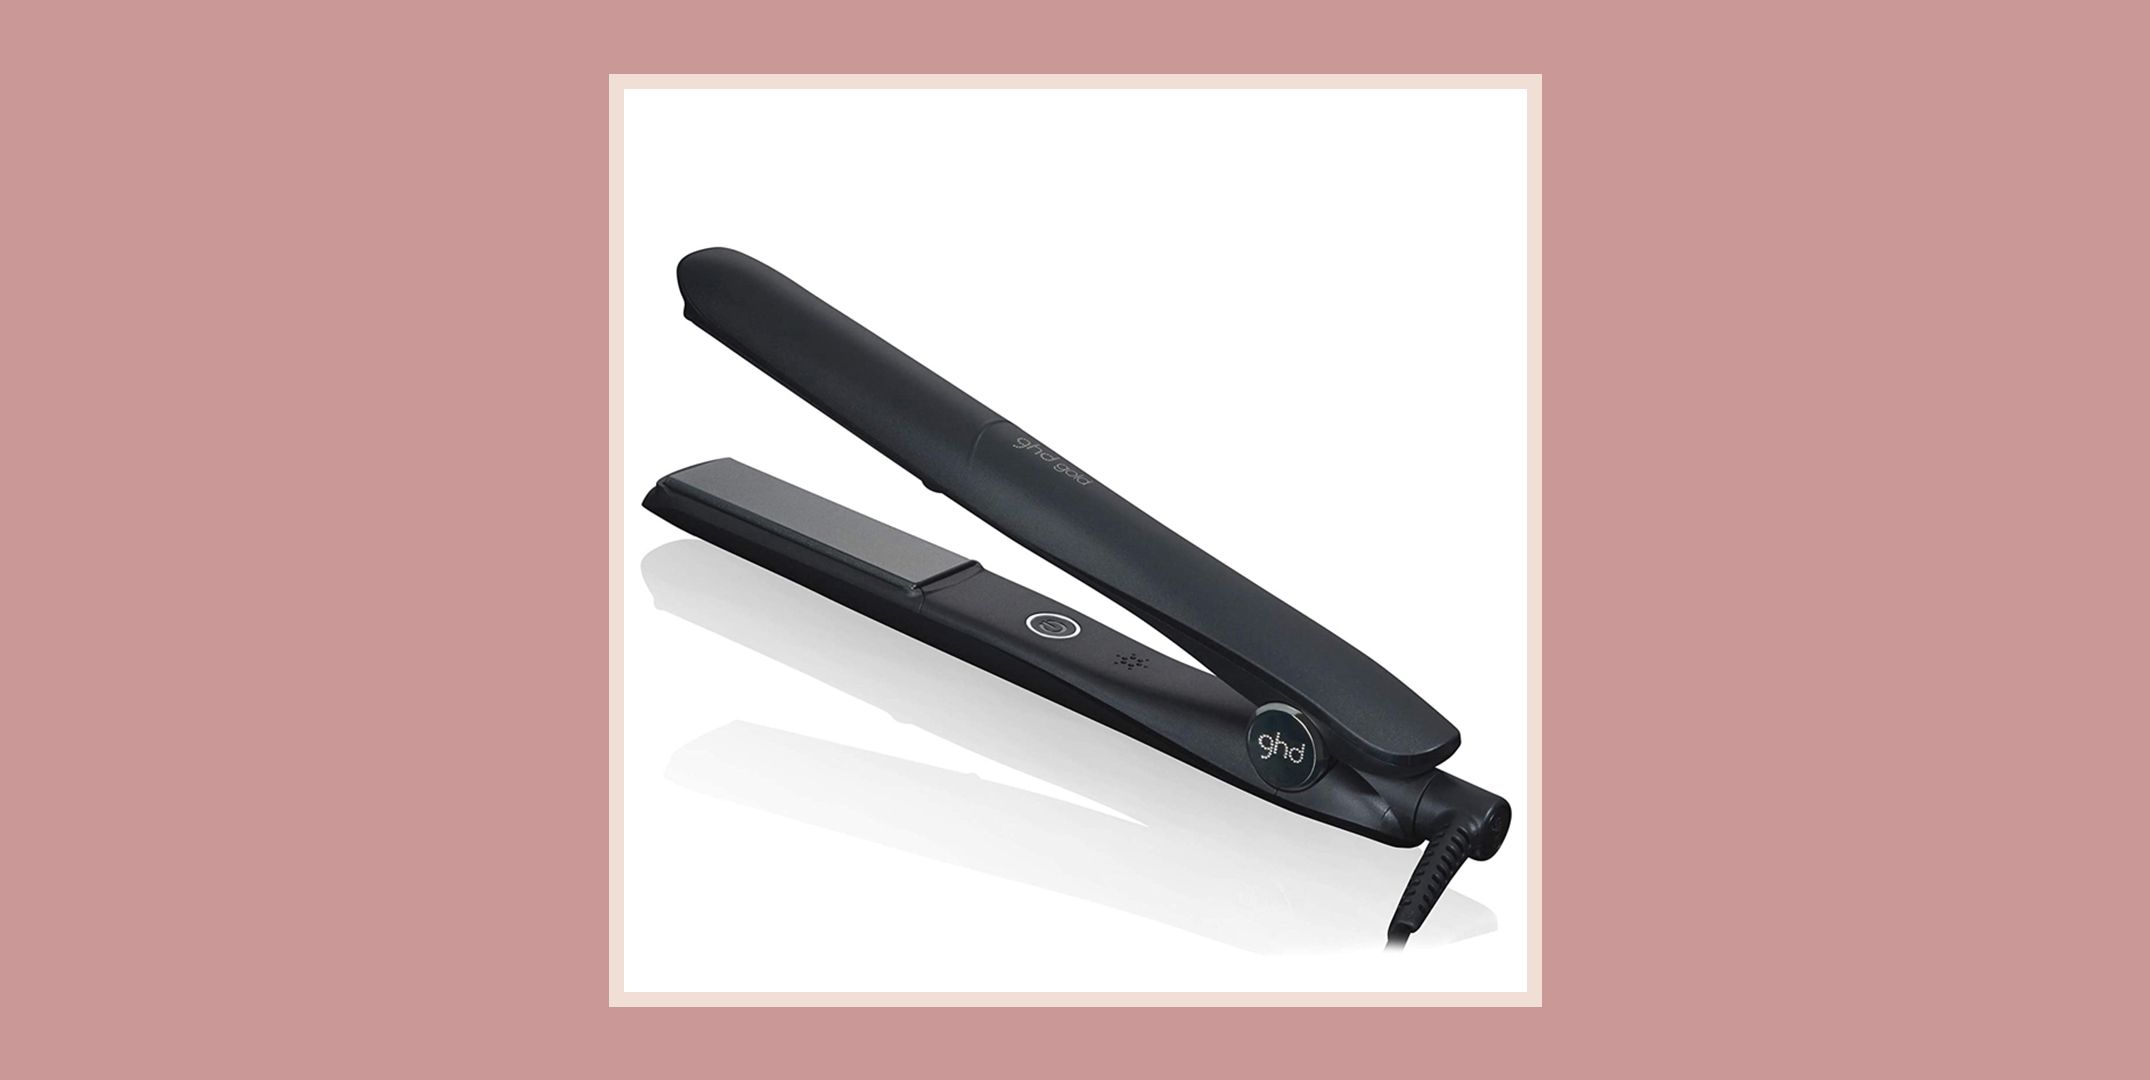 What's the Best Flat Iron or Straightener for Curly, Frizzy Hair?